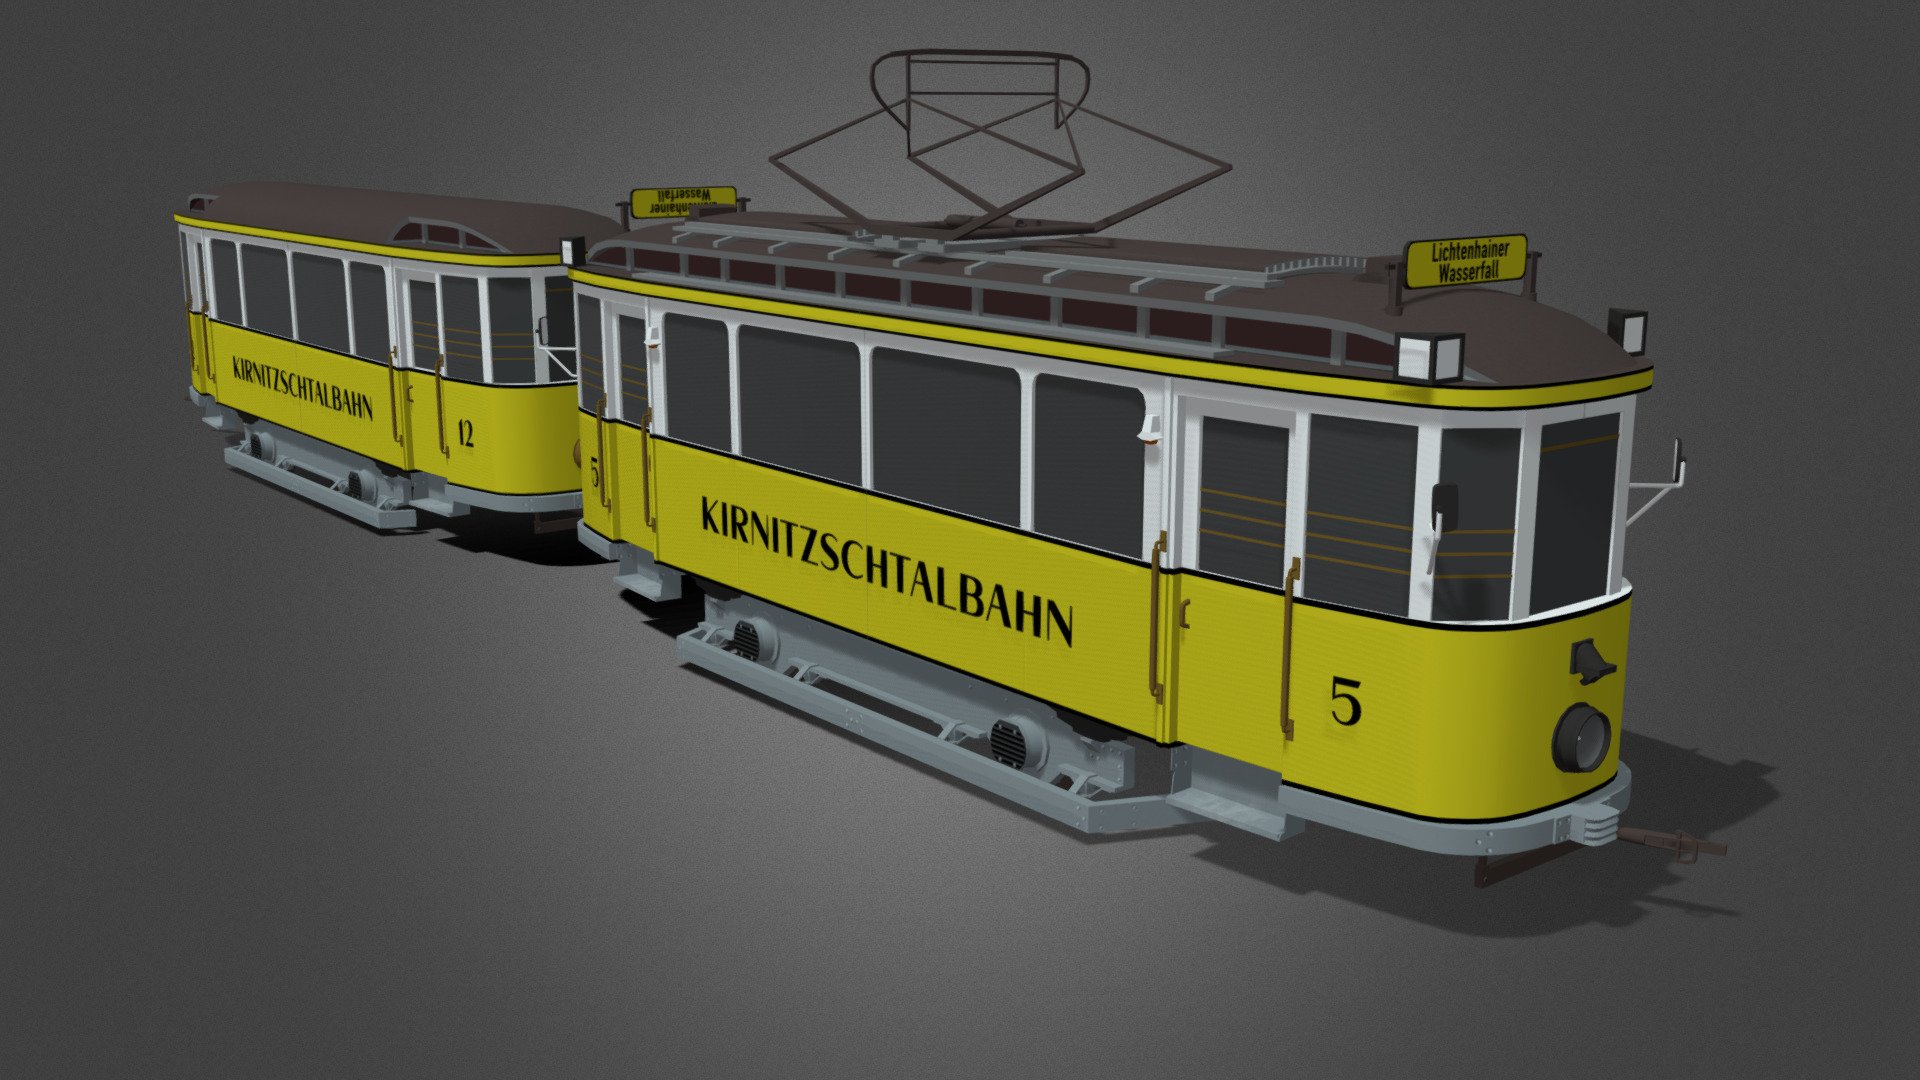 The Kirnitzschtalbahn, operated in the Kirnitschtal in the Elbe Sandstone Mountains, Saxon-Switzerland, Germany. This model was originally made as an asset for the game Cities: Skylines. There are simplifications to the texture and model to keep it optimised for the game 3d model